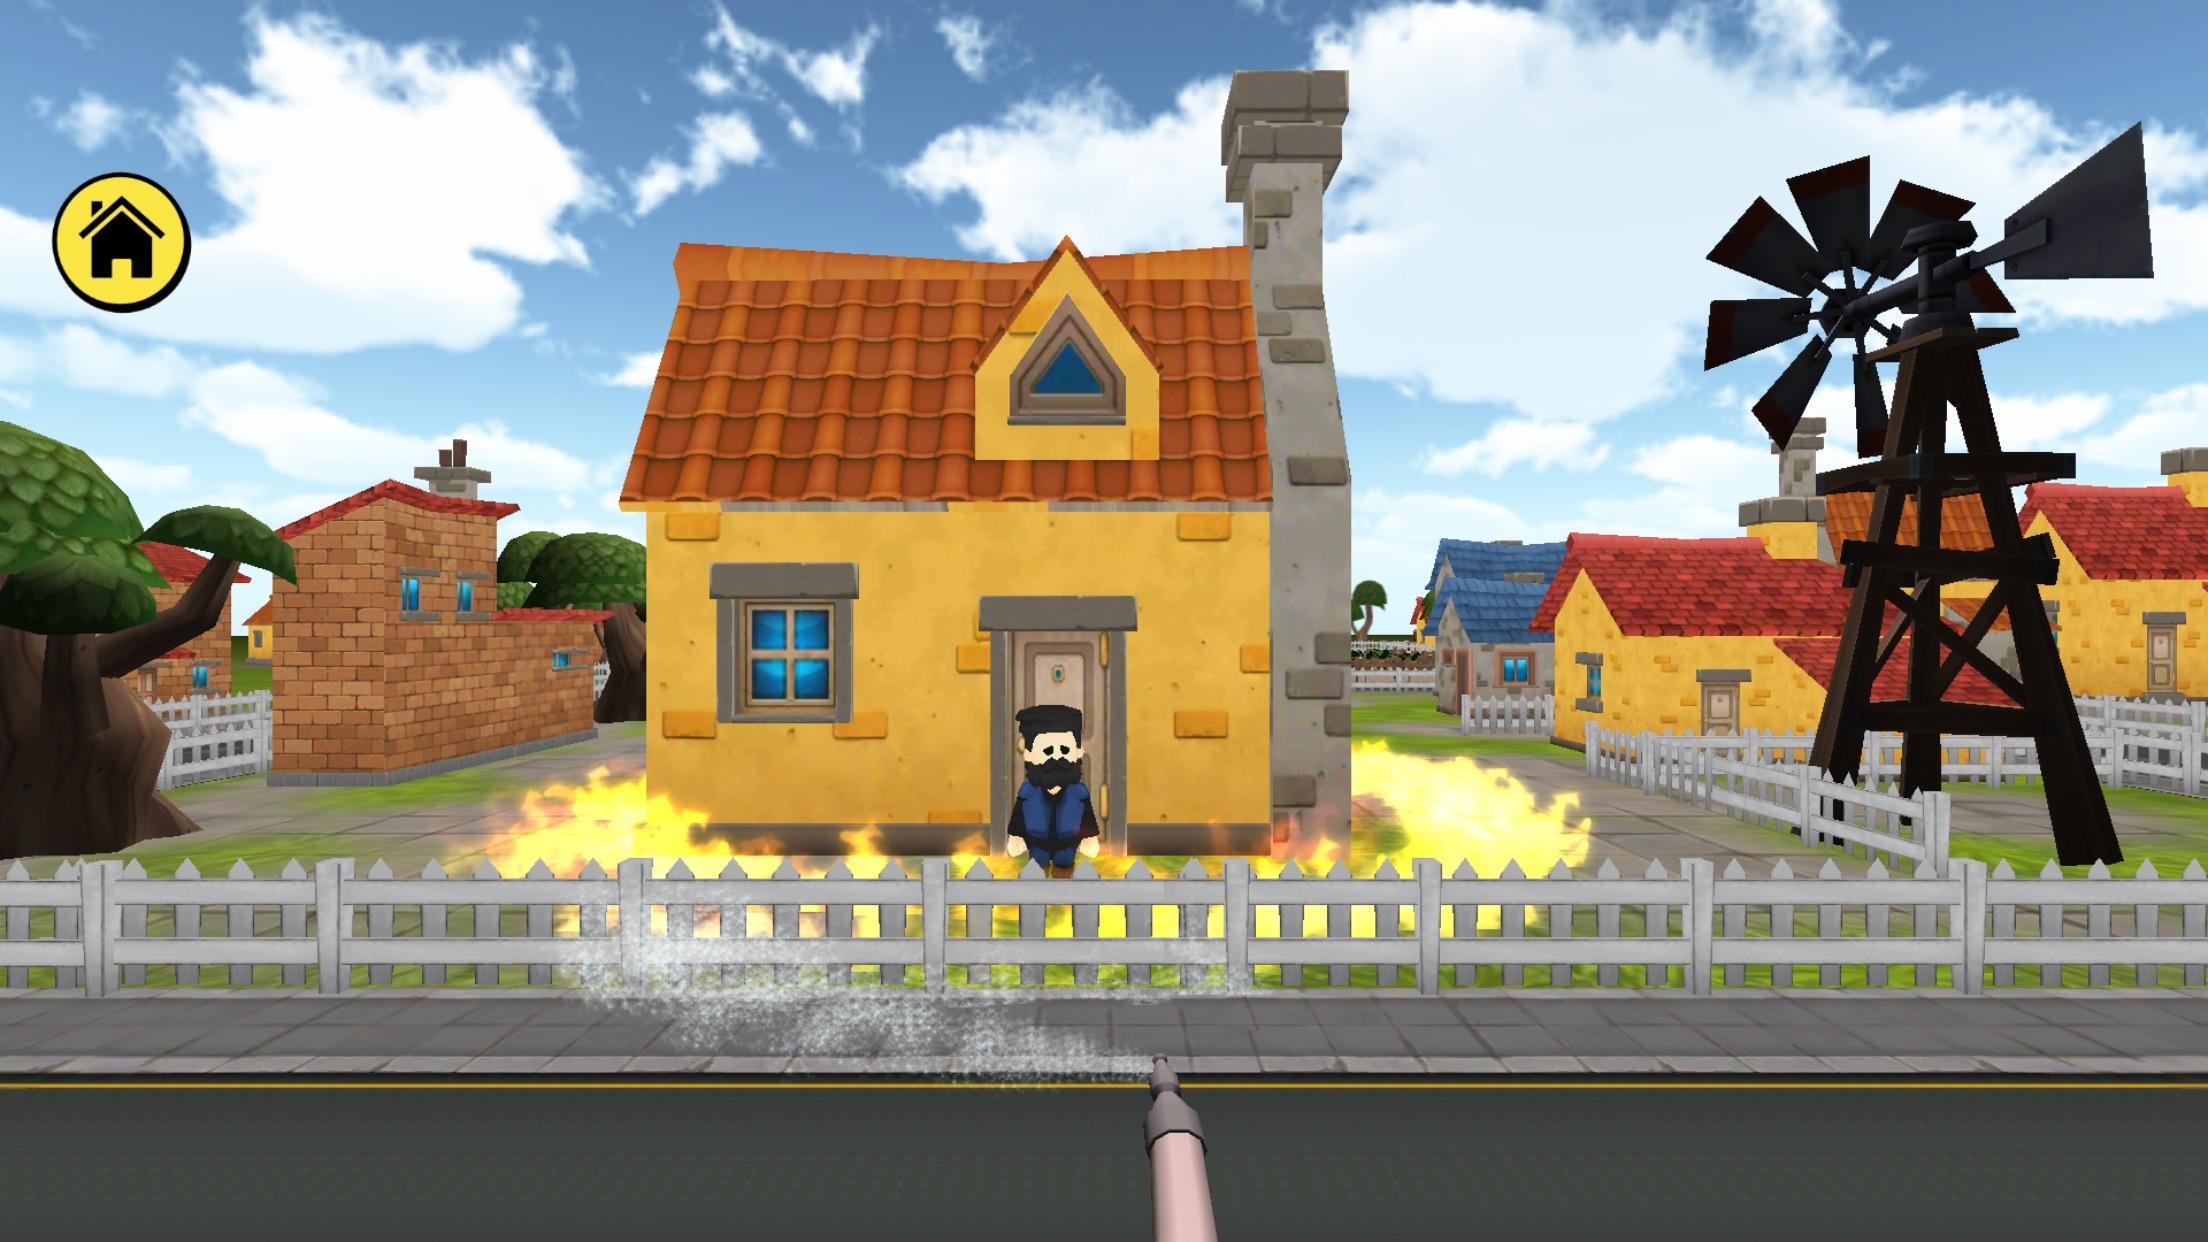 Kidlo Fire Fighter - Free 3D Rescue Game For Kids 1.8 Screenshot 8